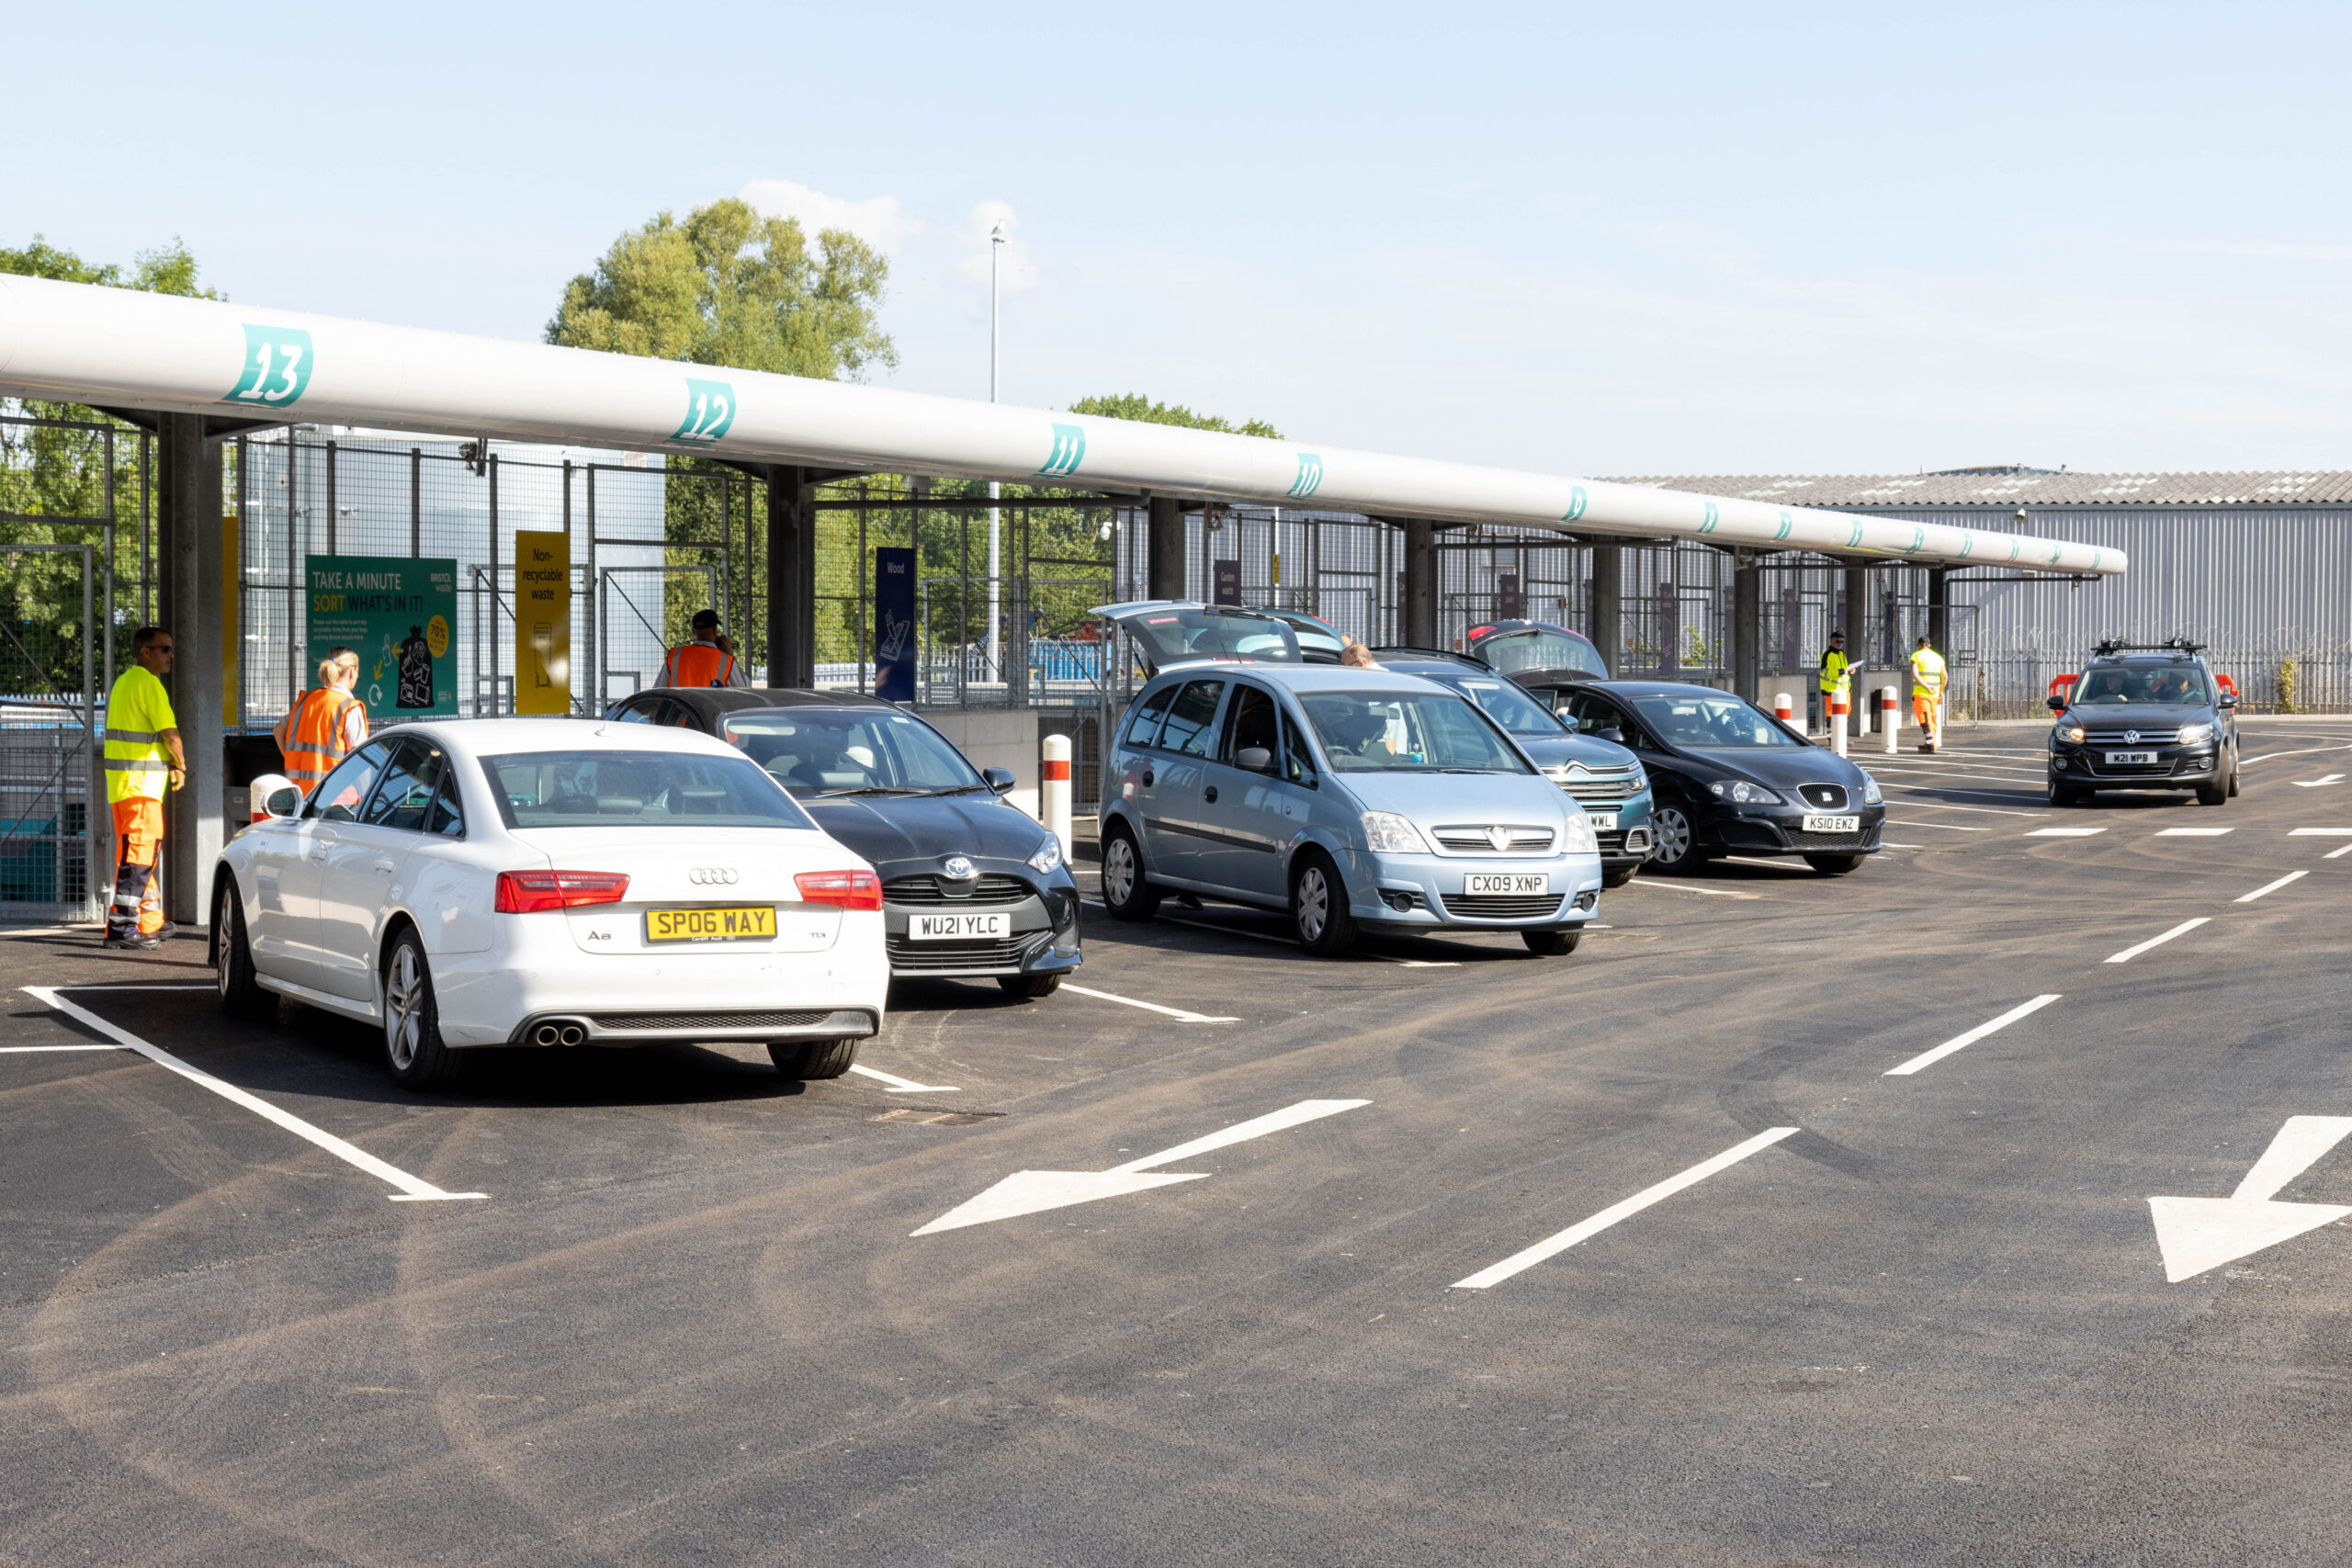 Cars line up to next to the bays to recycle household items at the recycling centre